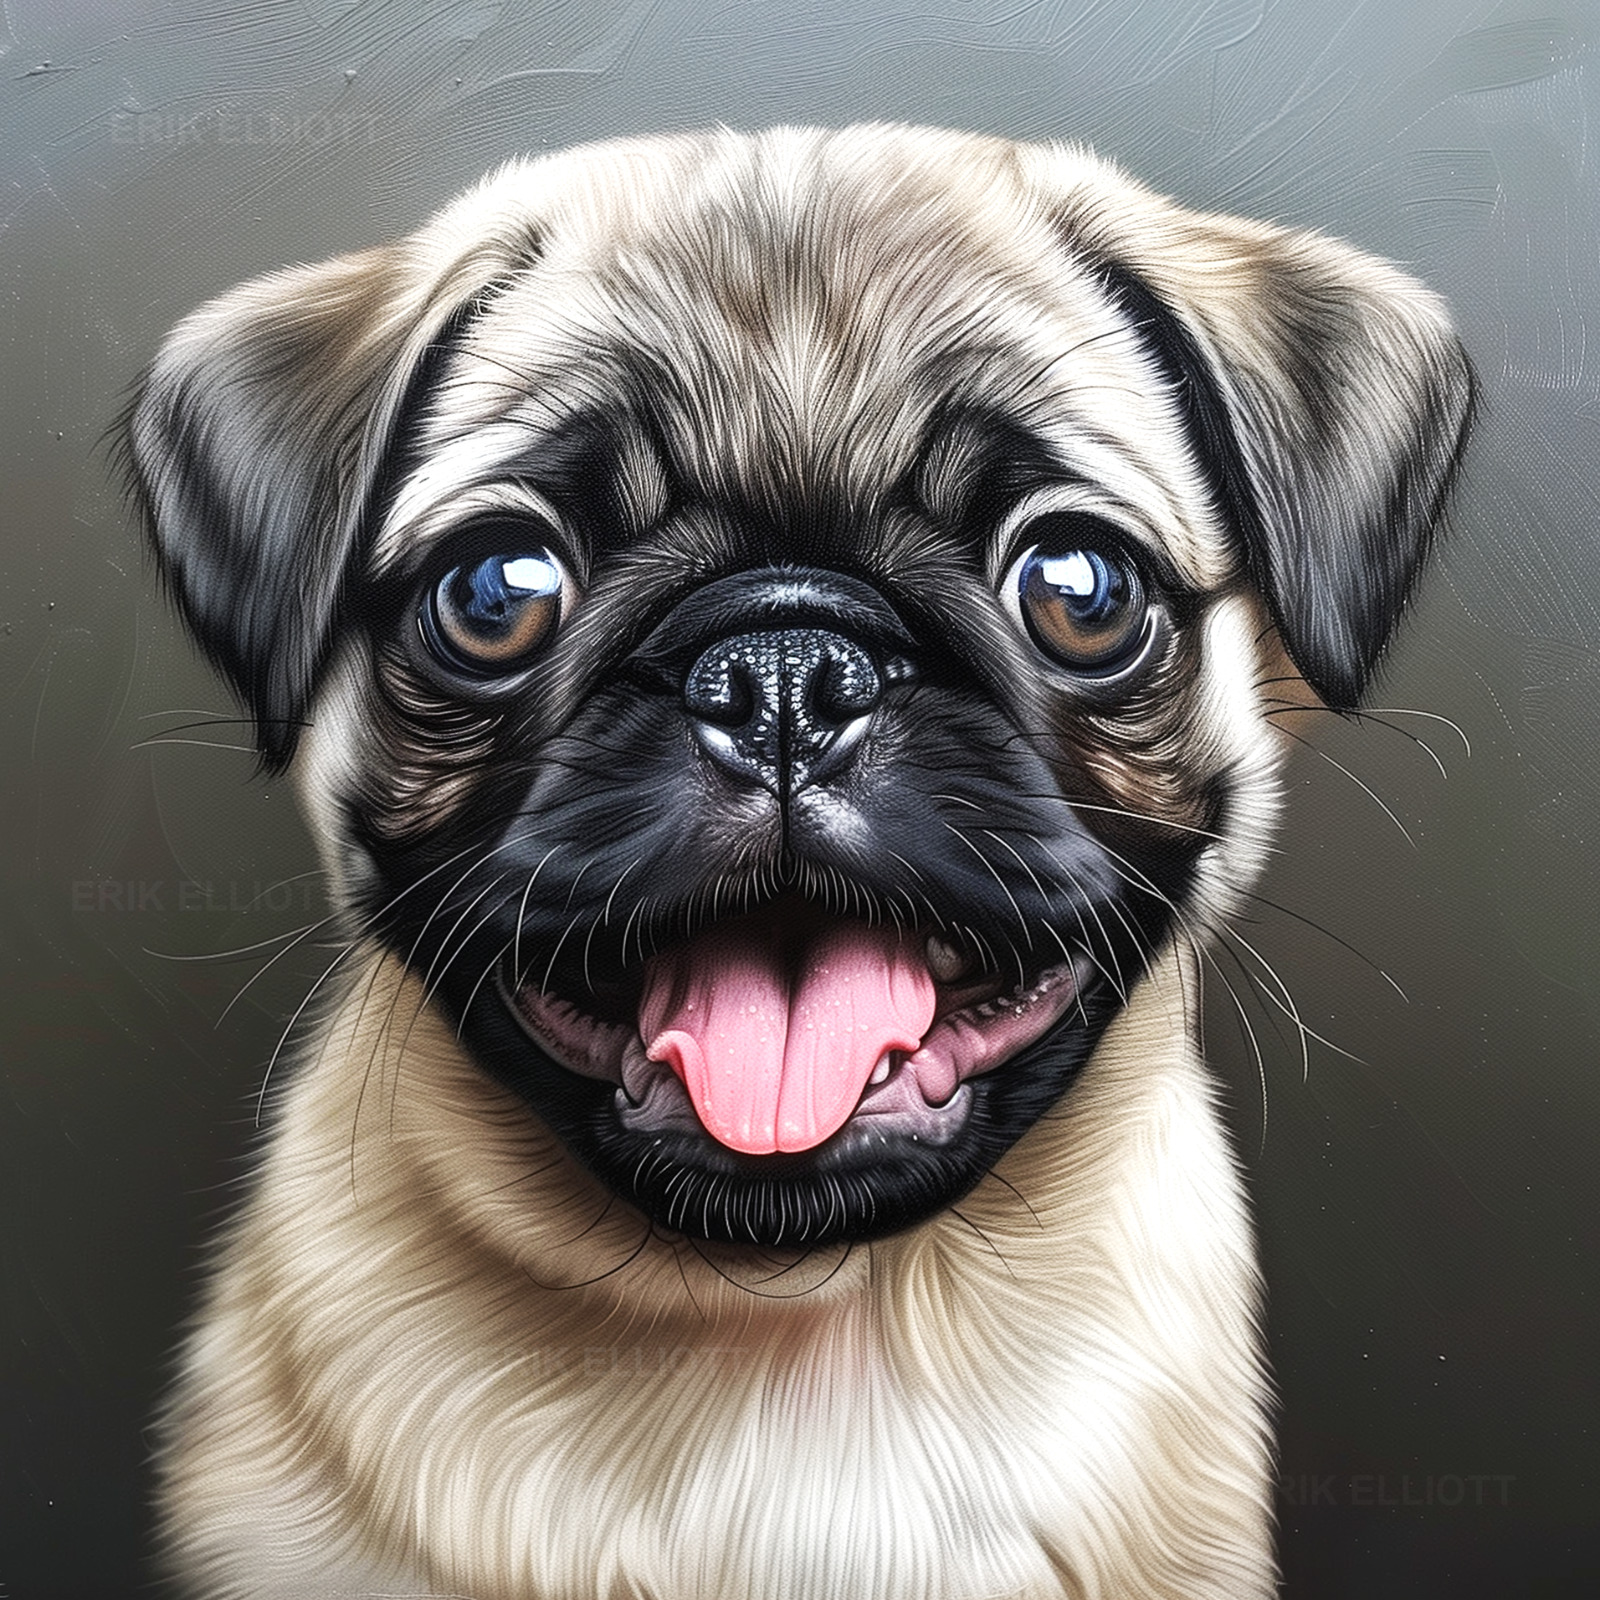 8x8 Unframed Cute Pug Dog Photo Artwork Print Photography Puppy Animal Picture